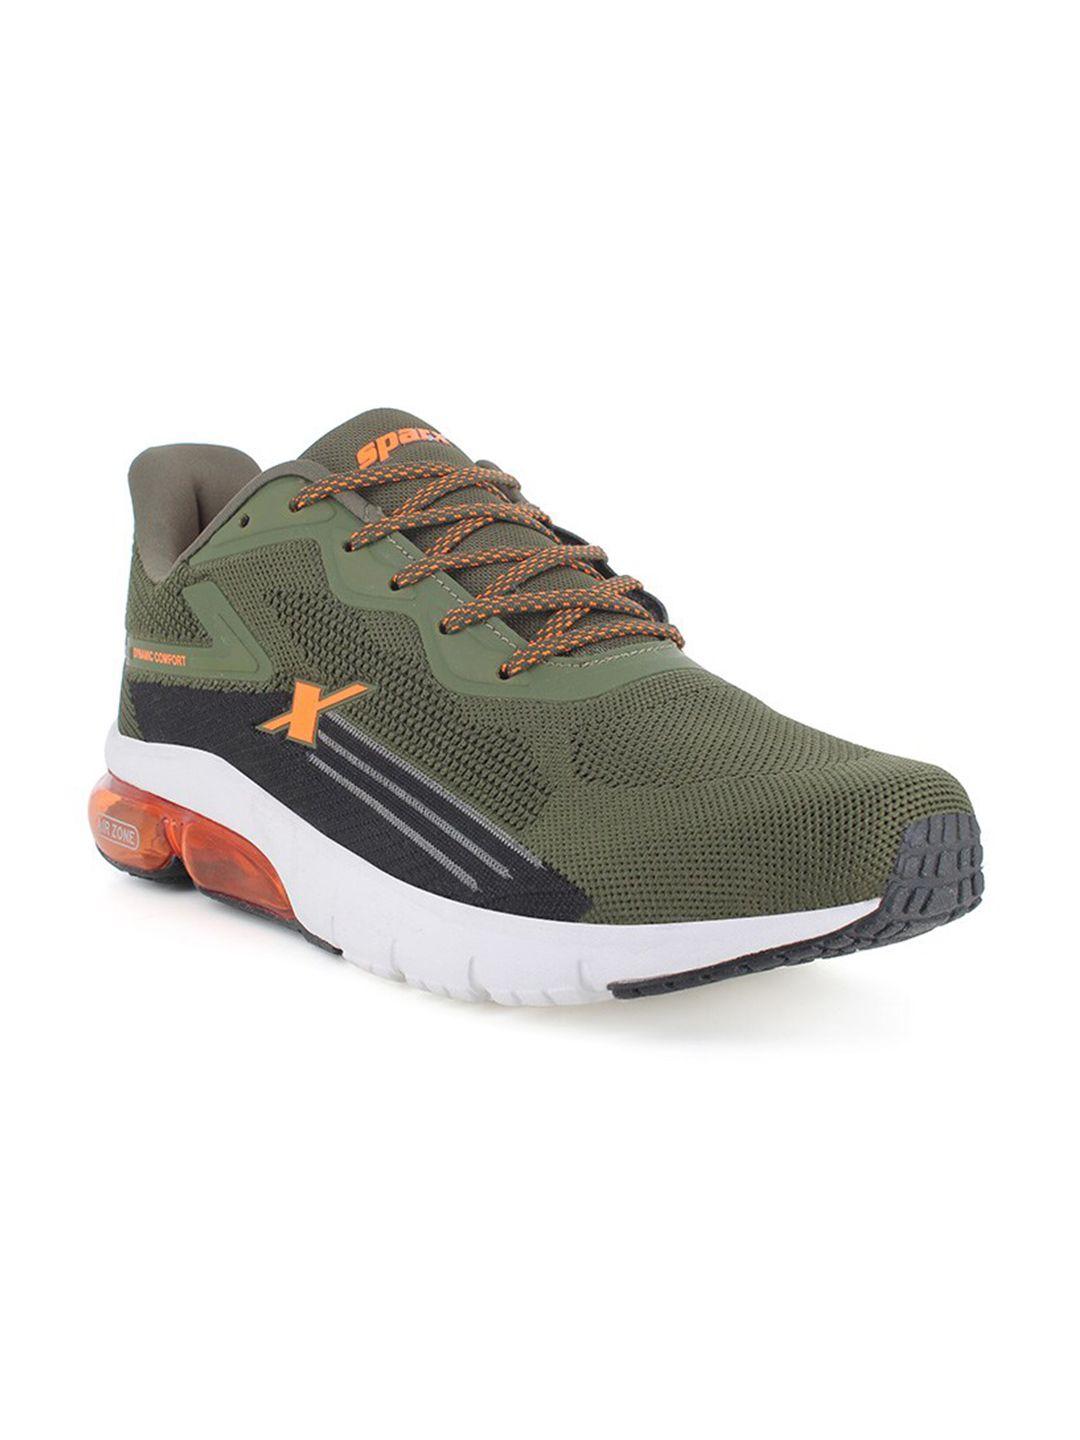 sparx-men-olive-green-textile-running-non-marking-shoes